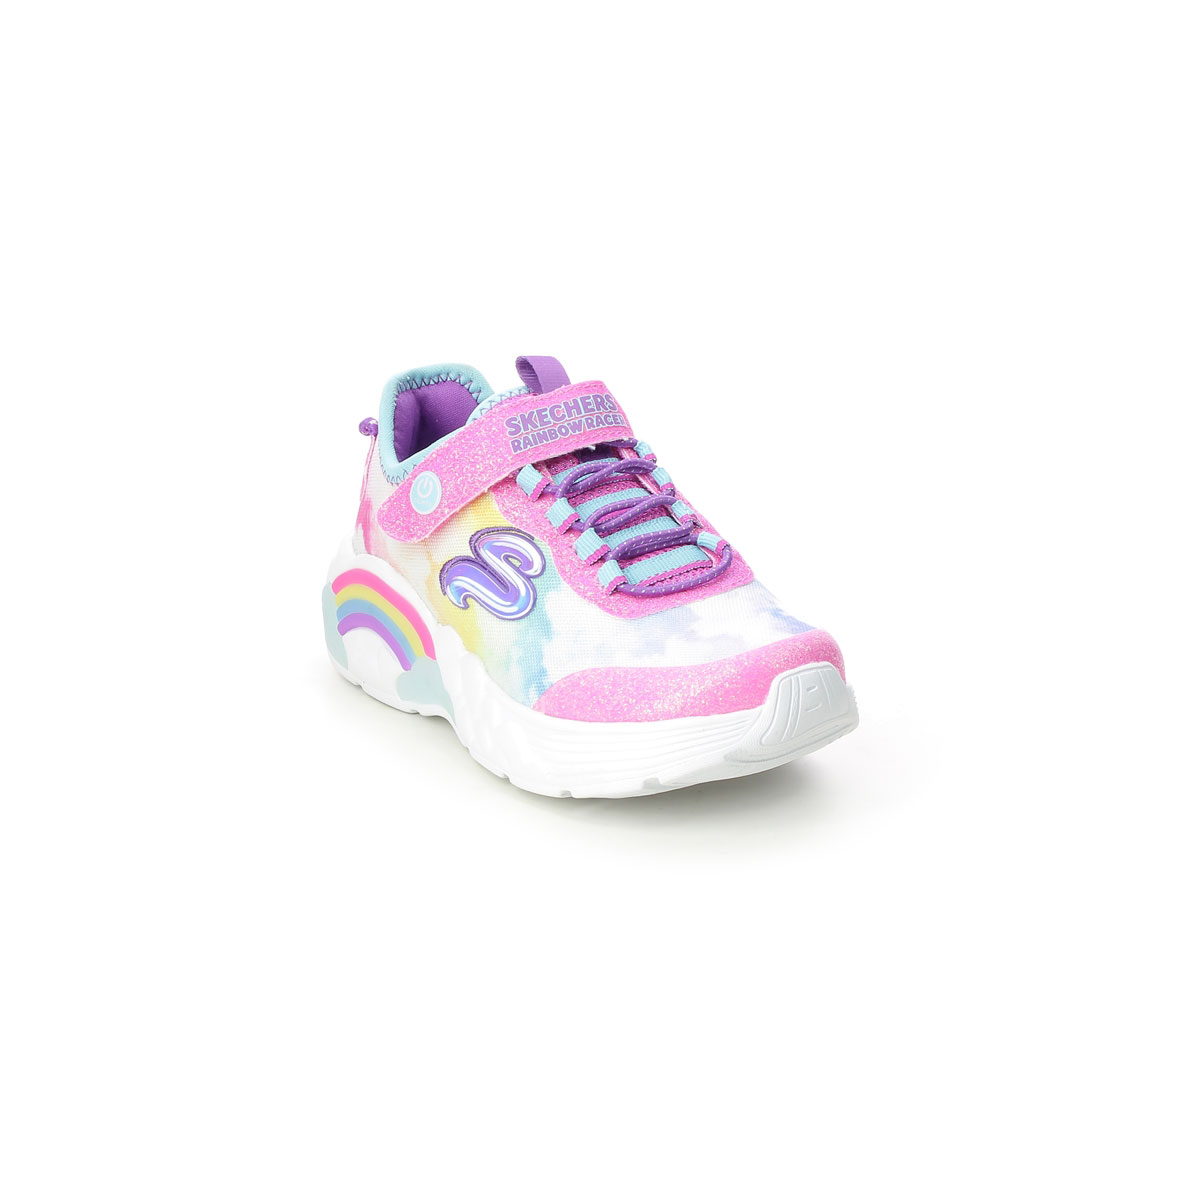 Skechers Rainbow Racer Pink Kids Girls Trainers 302300L In Size 30 In Plain Pink For kids